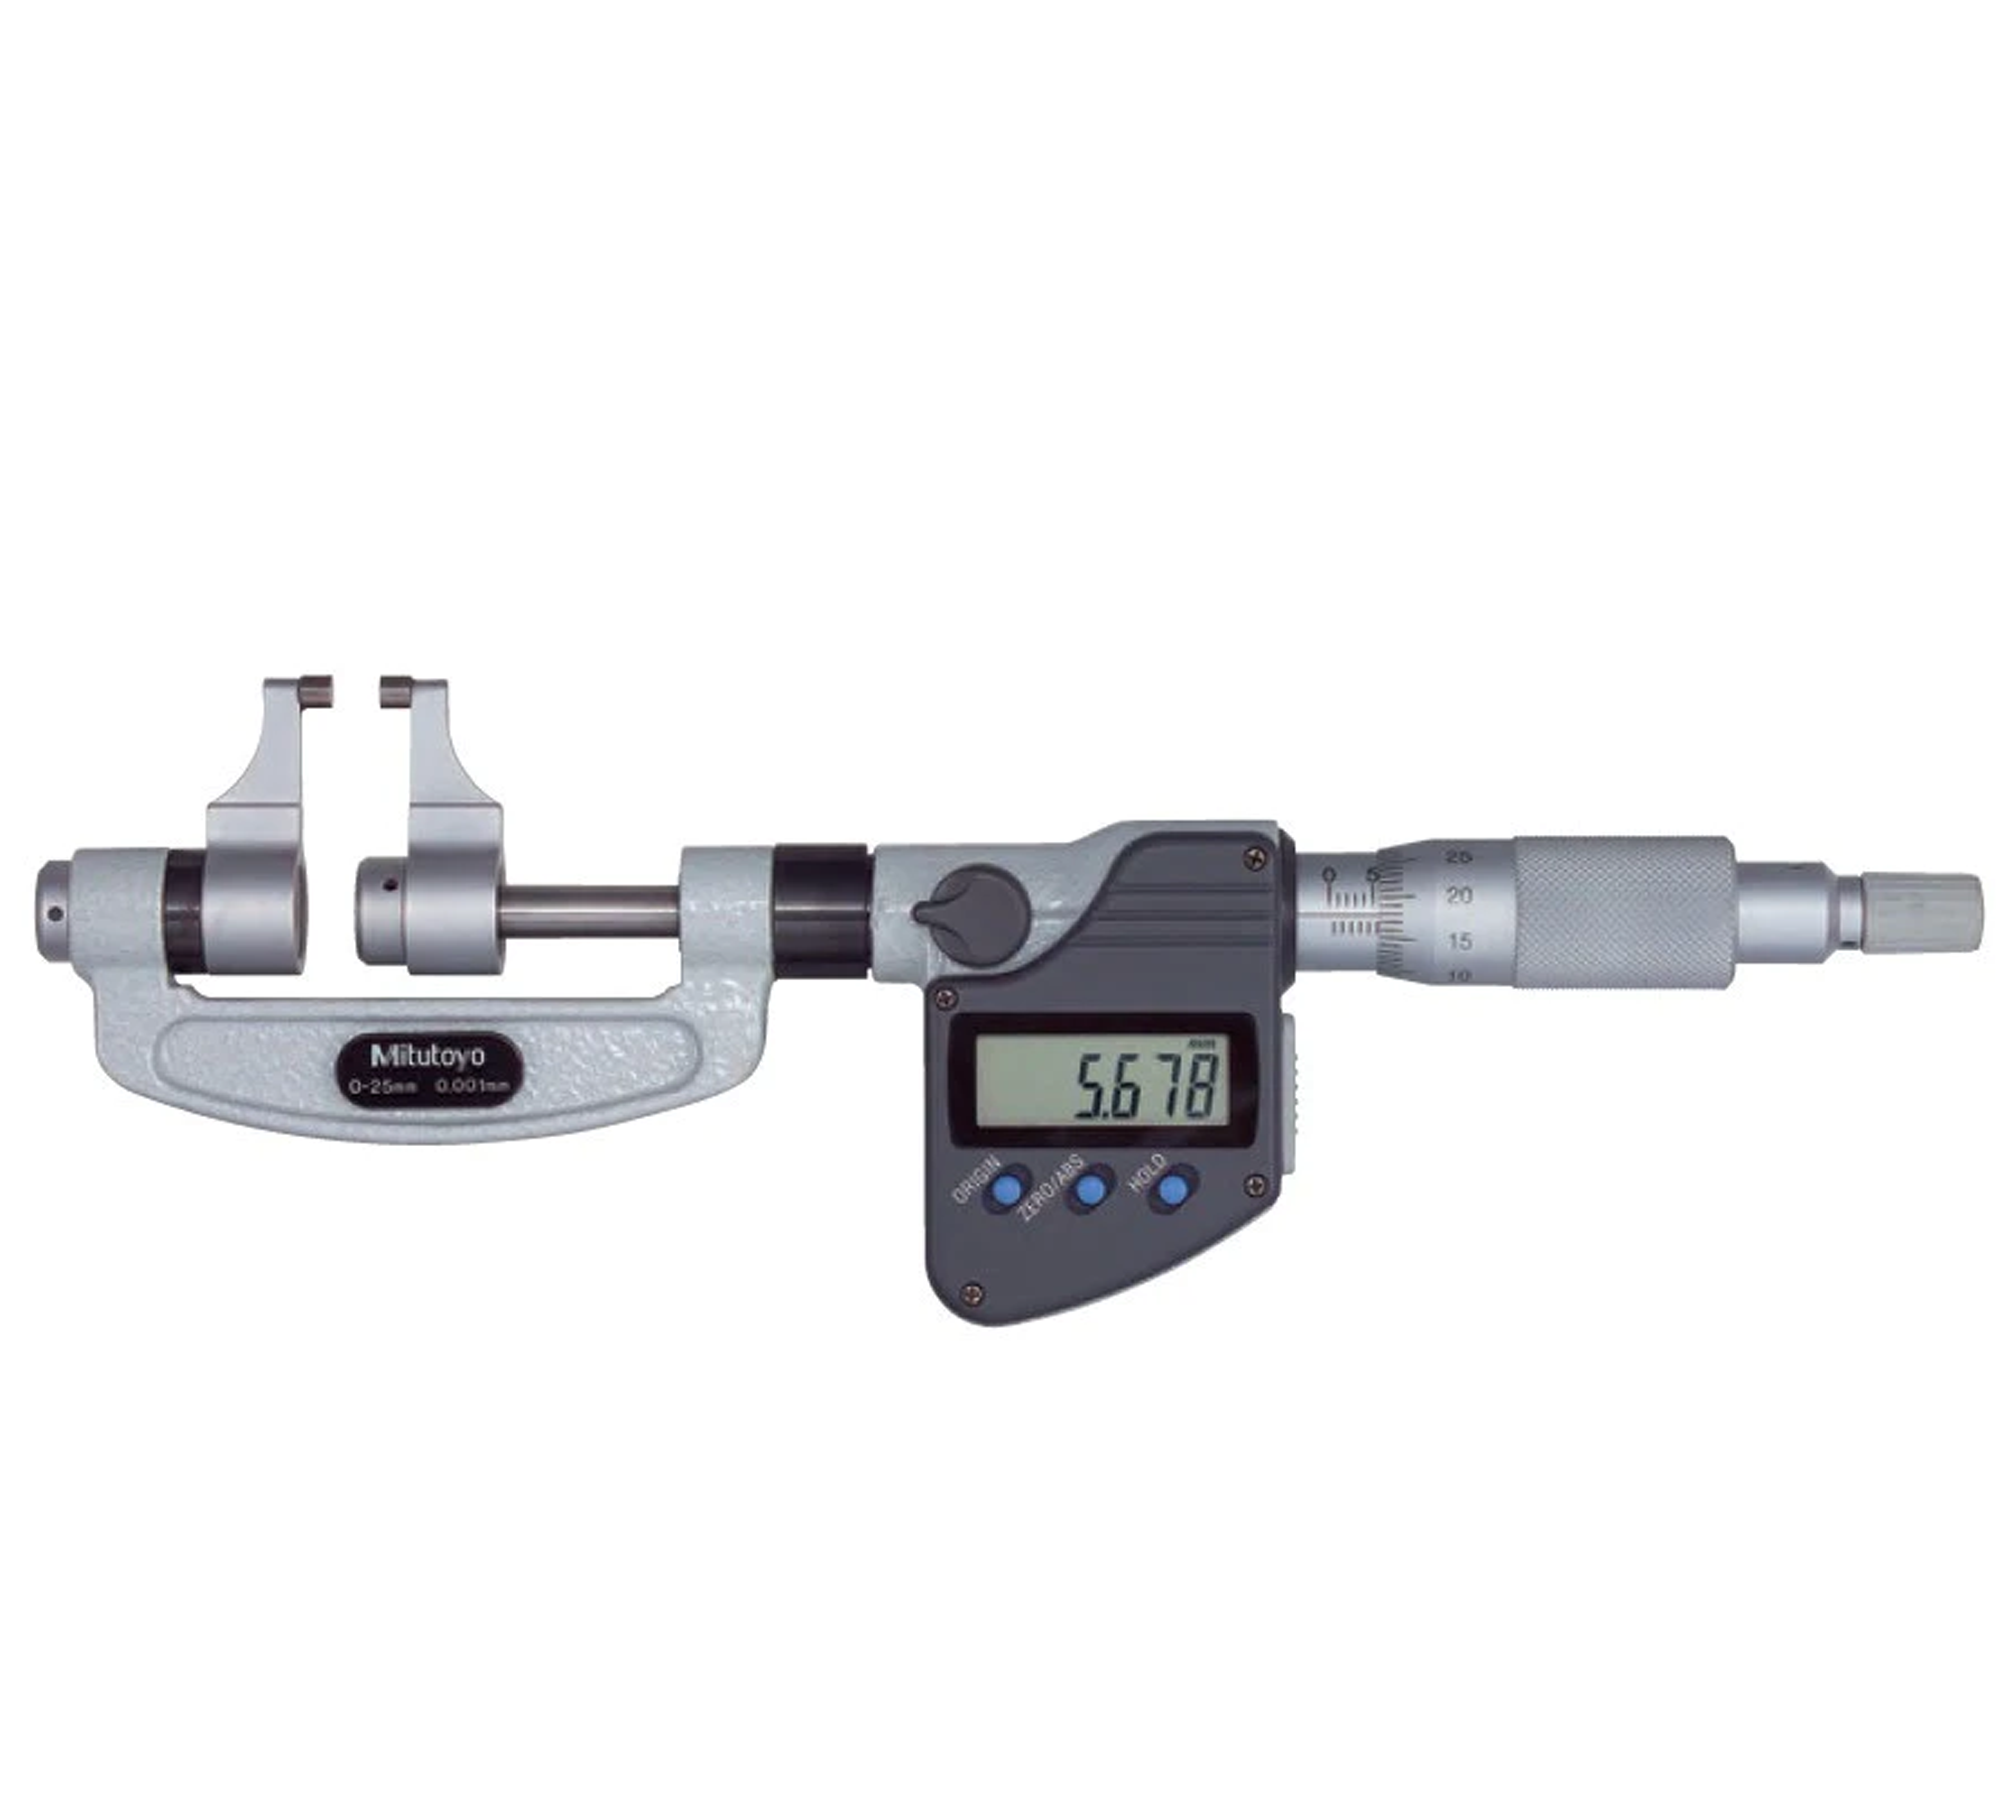 Shop Caliper-Type Micrometers Gages at GreatGages.com